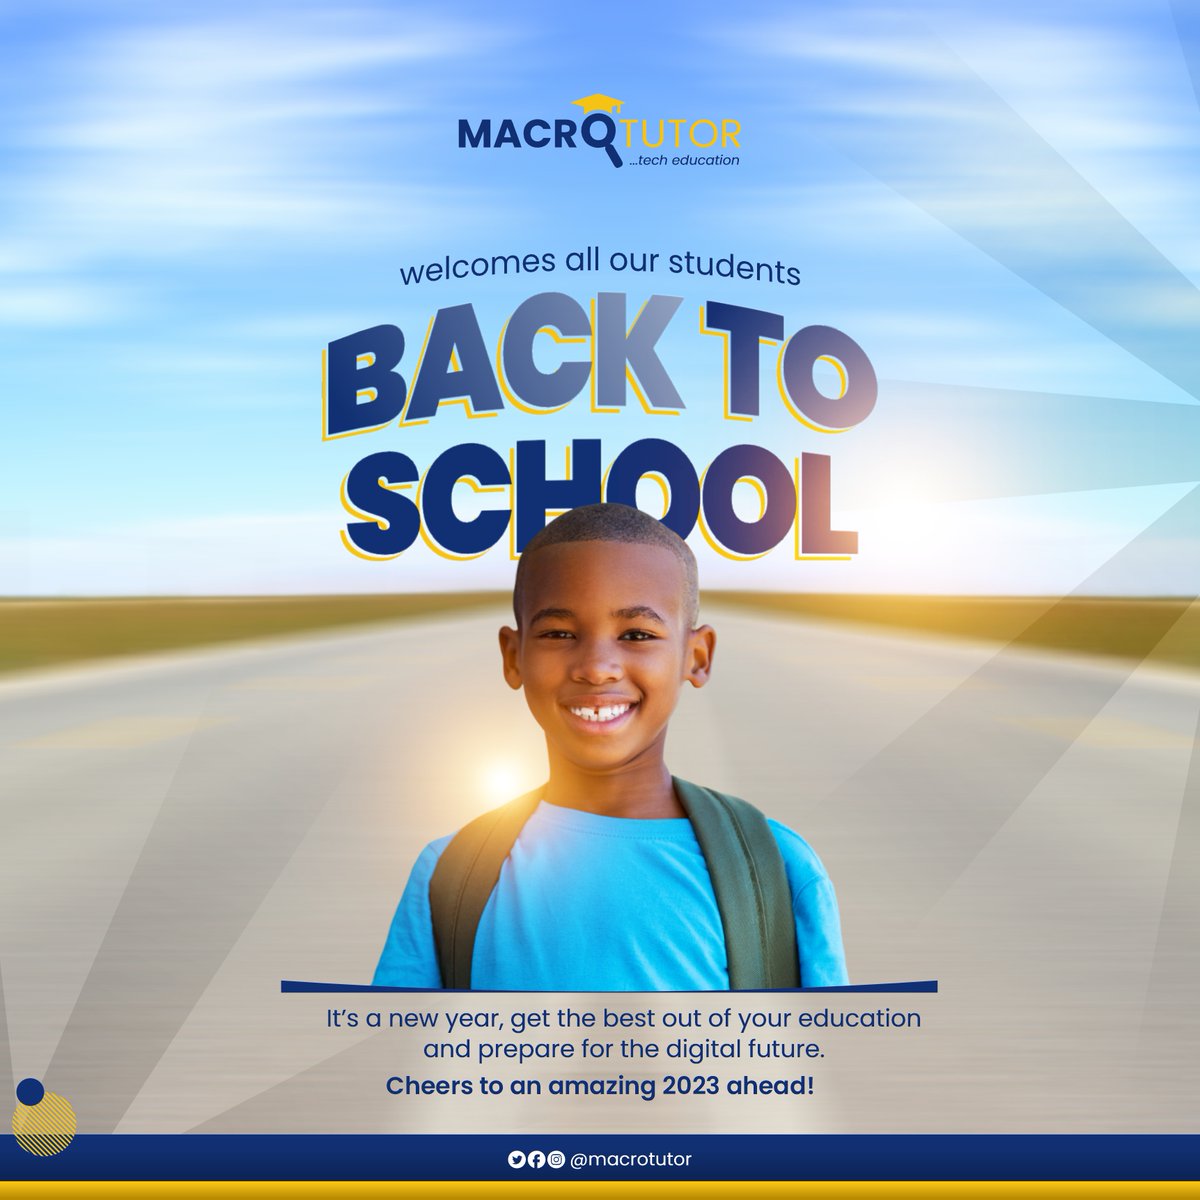 We’re excited to welcome all our amazing students back to school this week. 

Wishing you success in your academics this term.
#kidscoding #Techkids #WelcomeBackToSchool